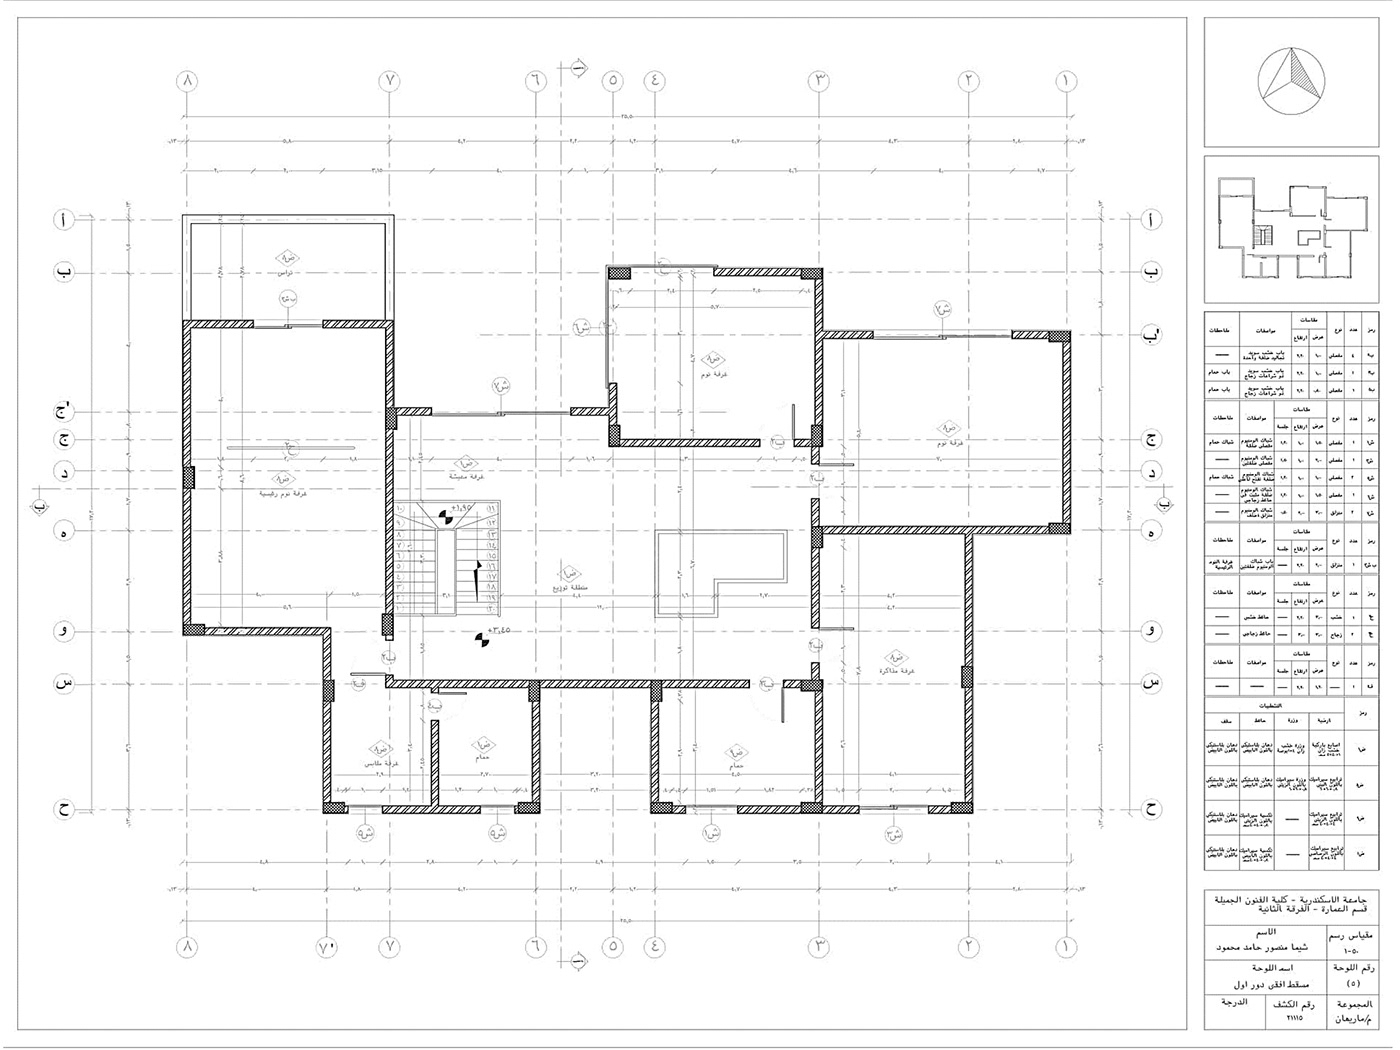 architecture shopdrawing Shopdrawings working drawings AutoCAD construction construction building detail details Working Details